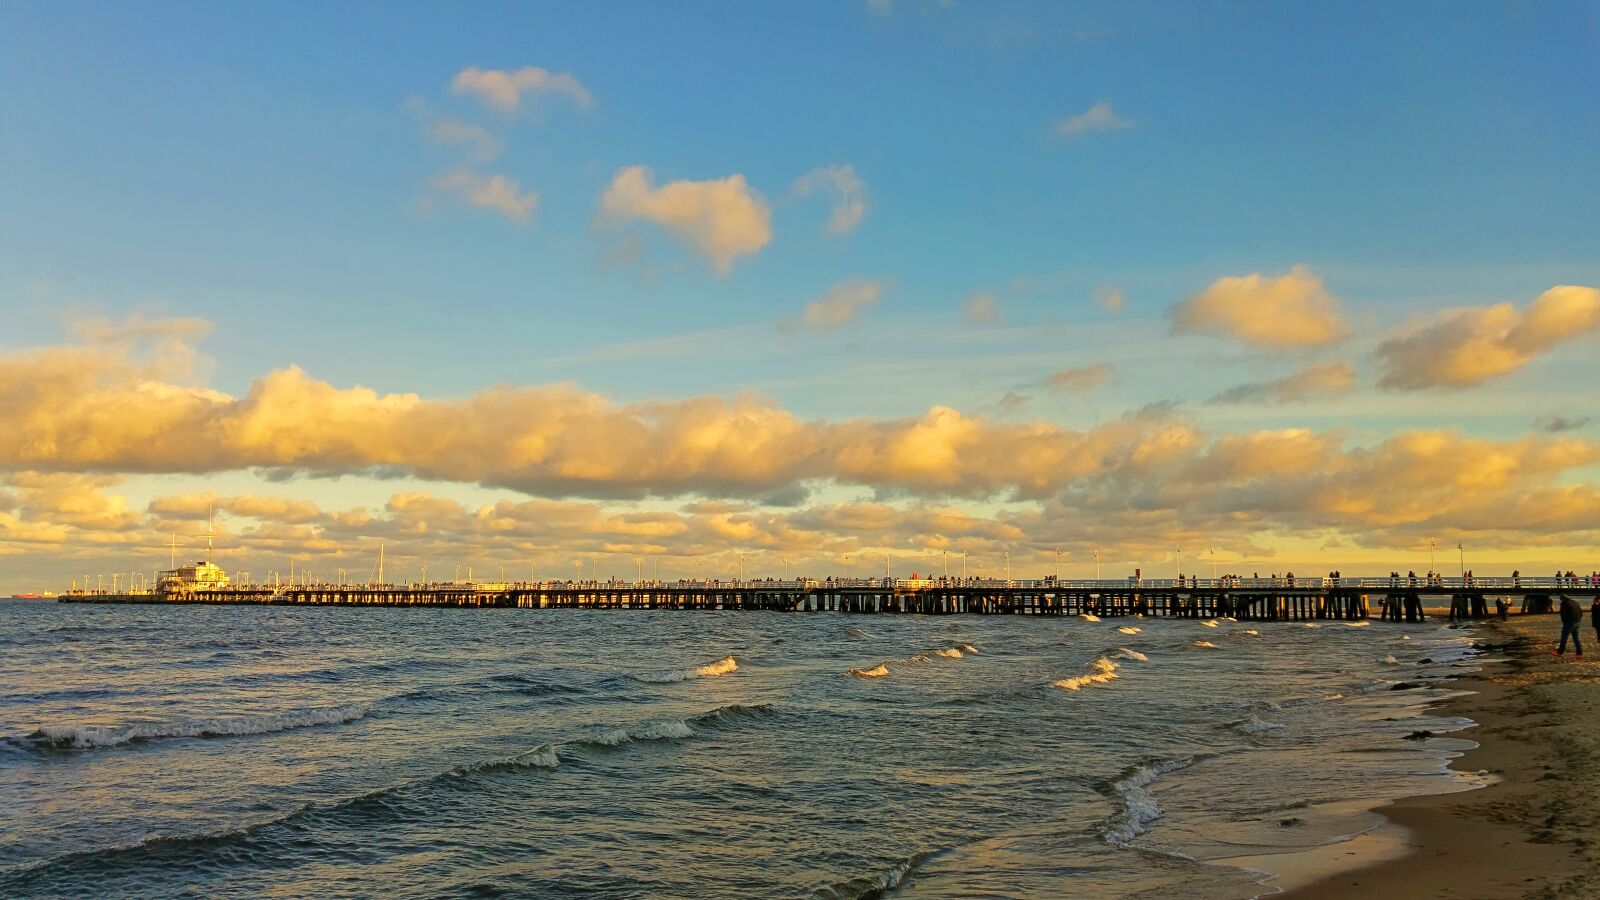 LG G4 sample photo. The pier, golden hour photography